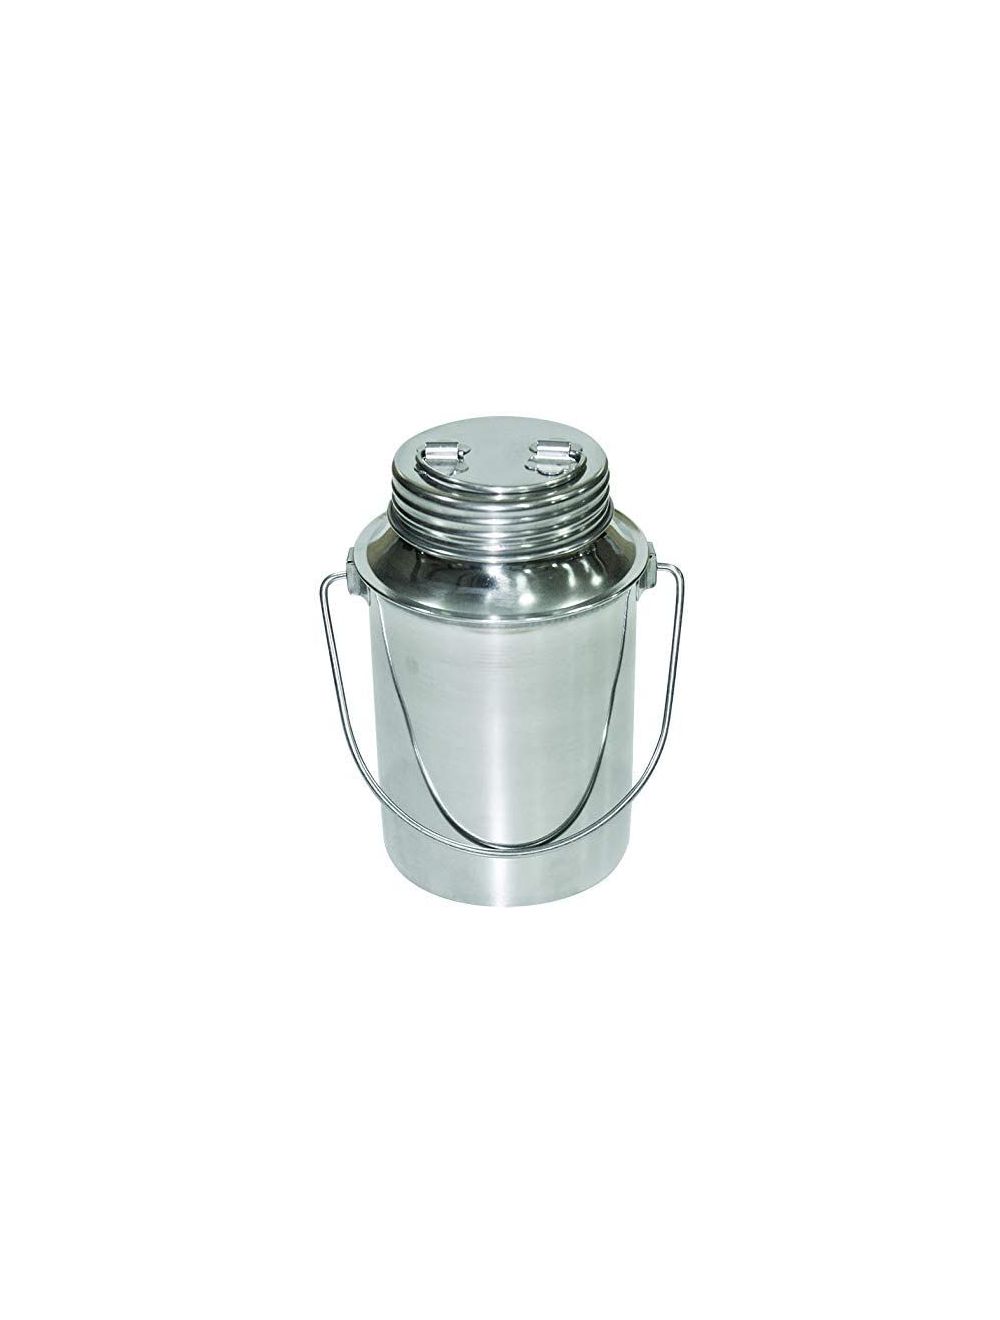 Raj Storage Container with Screw Lid, Silver, 1 litre, SB01.0